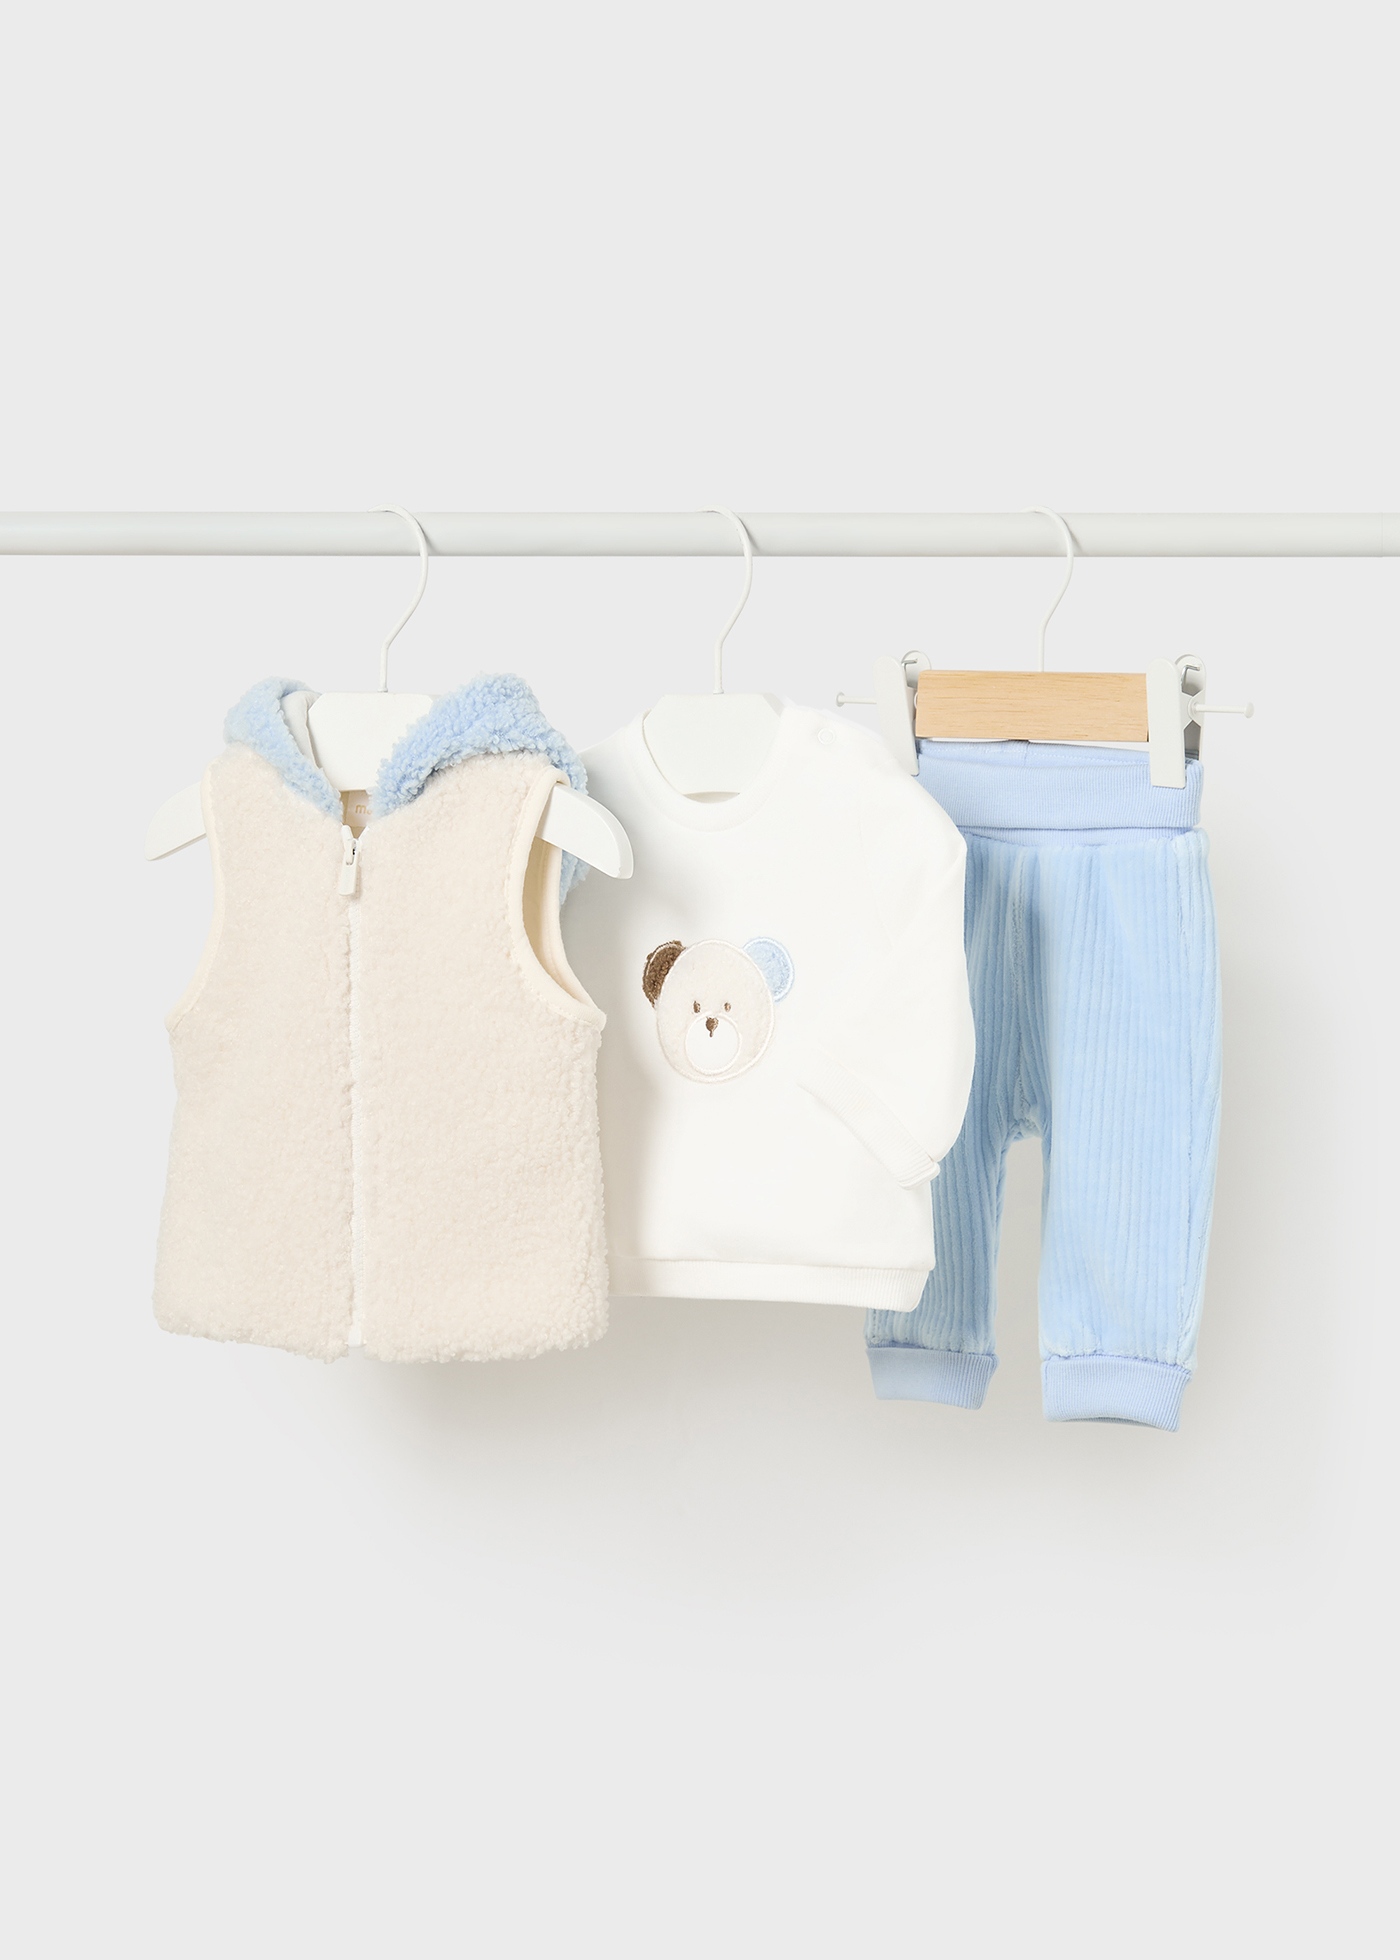 OneTwoThree, 100% cotton, 100% care💛 You don't just see the difference,  you feel it. Shop the perfect OneTwoThree set for your little one in-store.  📍OneTwoThree 2, By Edgars